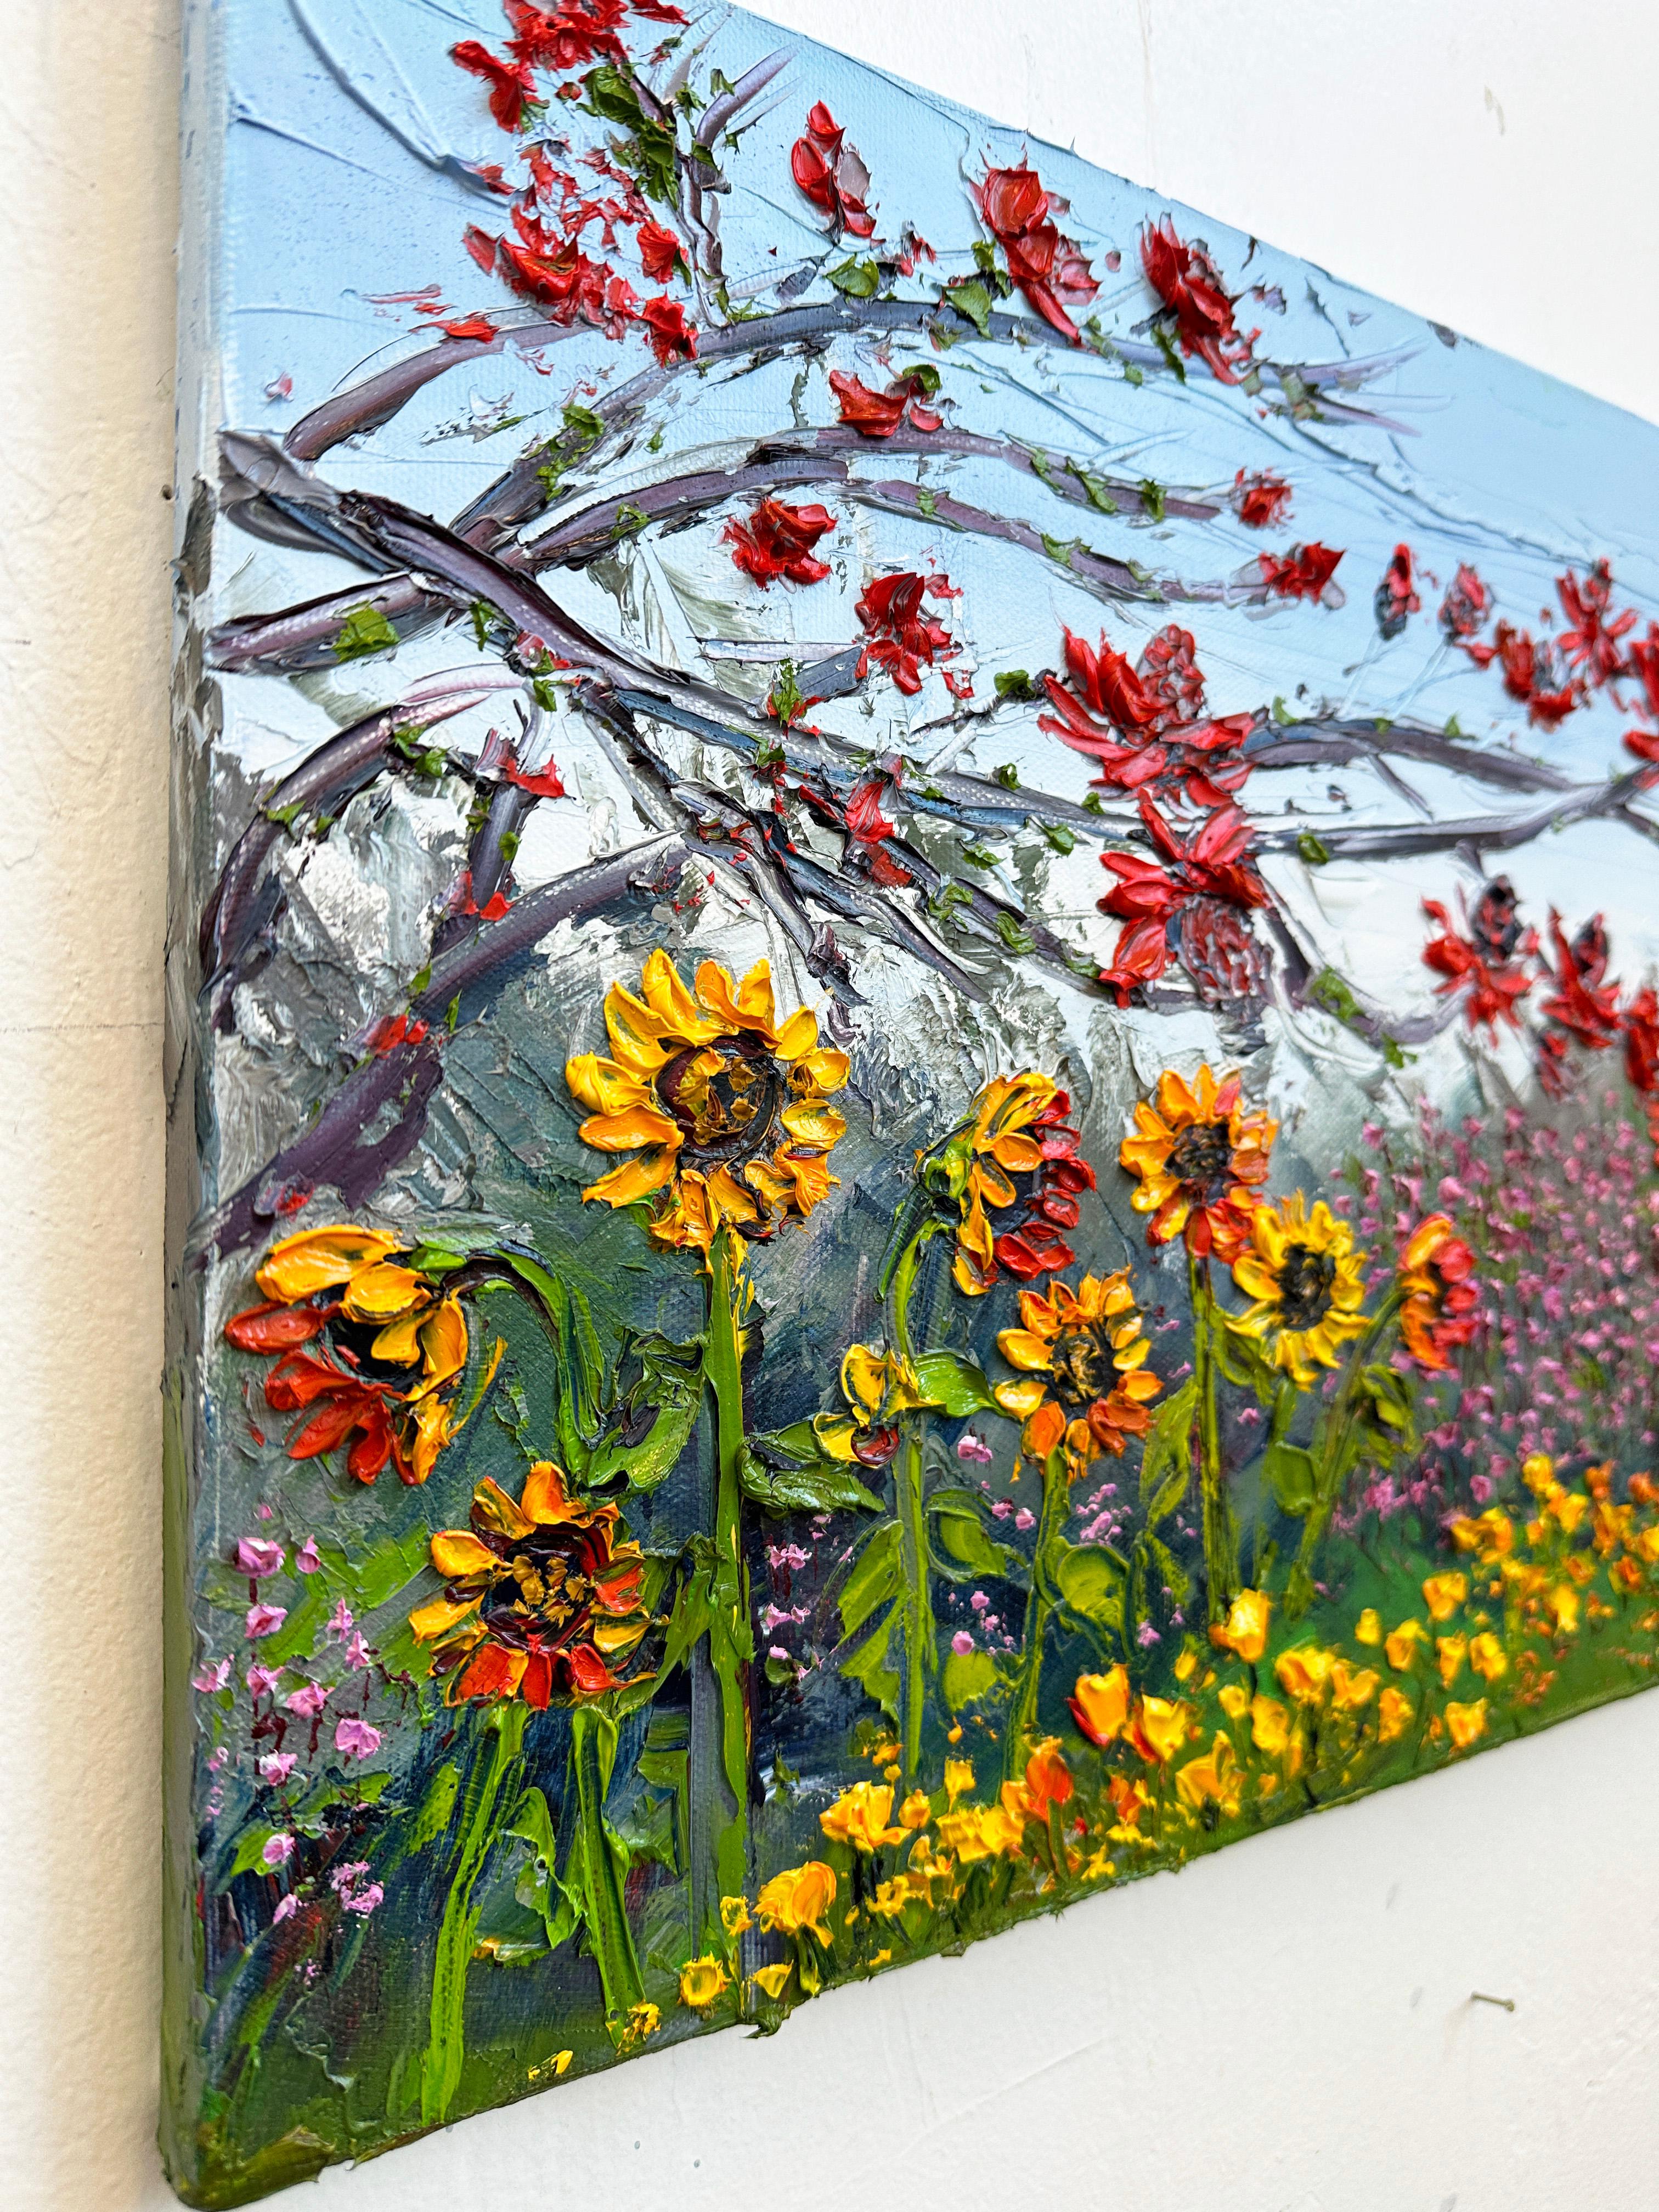 <p>Artist Comments<br>A garden teeming with Southern California sunflowers and peonies burst with delight. Its blooming inhabitants engage in a gentle dance, following the wind's command. A small trail makes its way into the lush garden, inviting